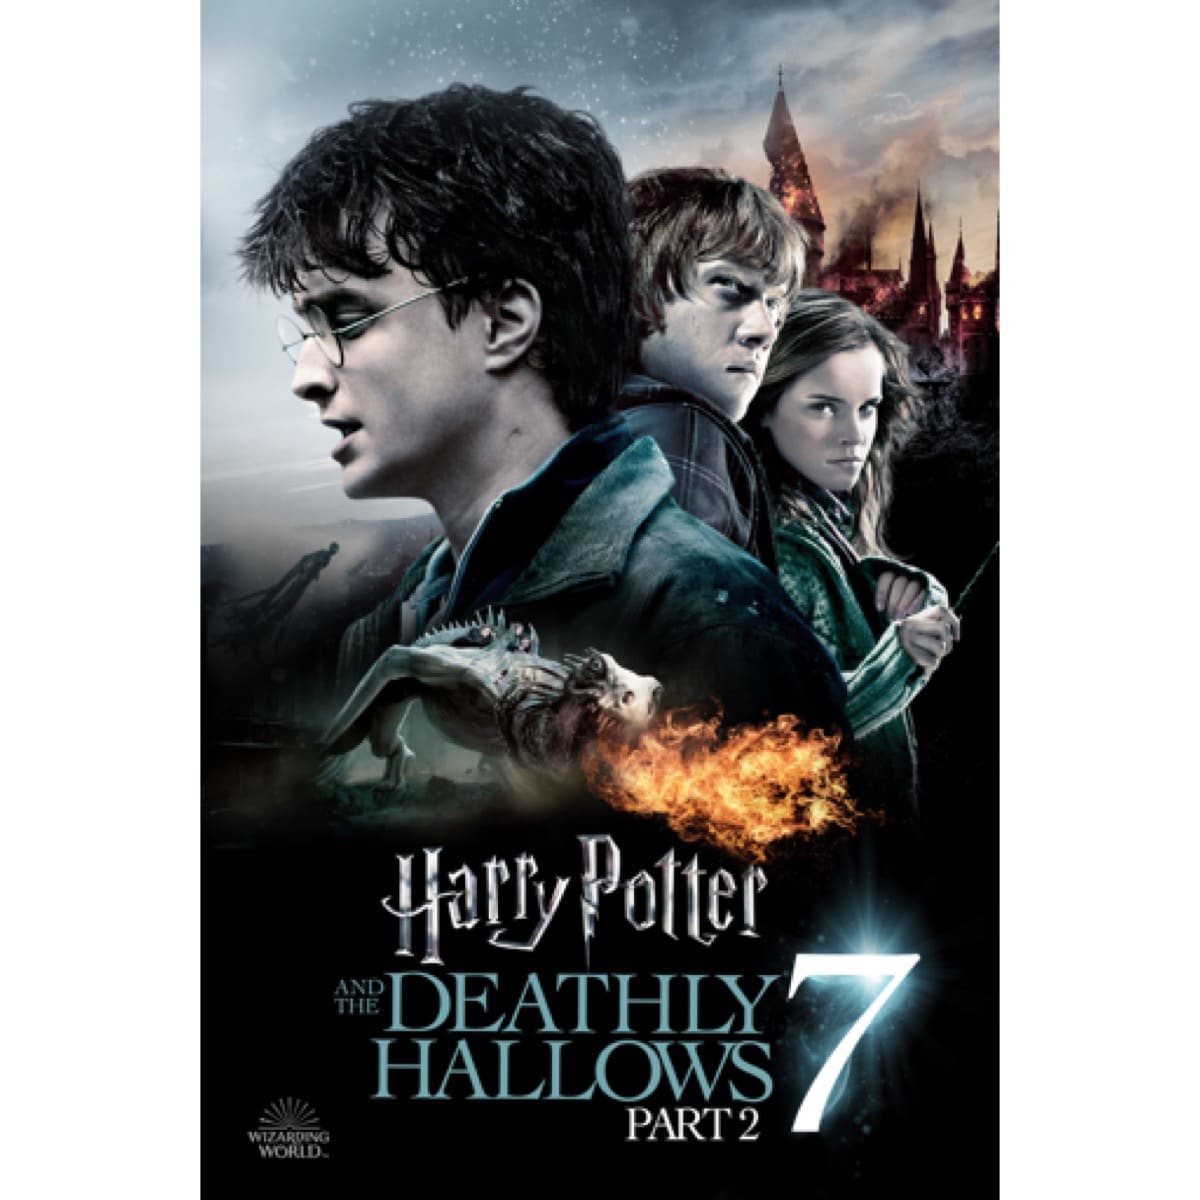 Harry Potter and the Deathly Hallows, Part 2, 33% off, âï¸? $9.99 ...